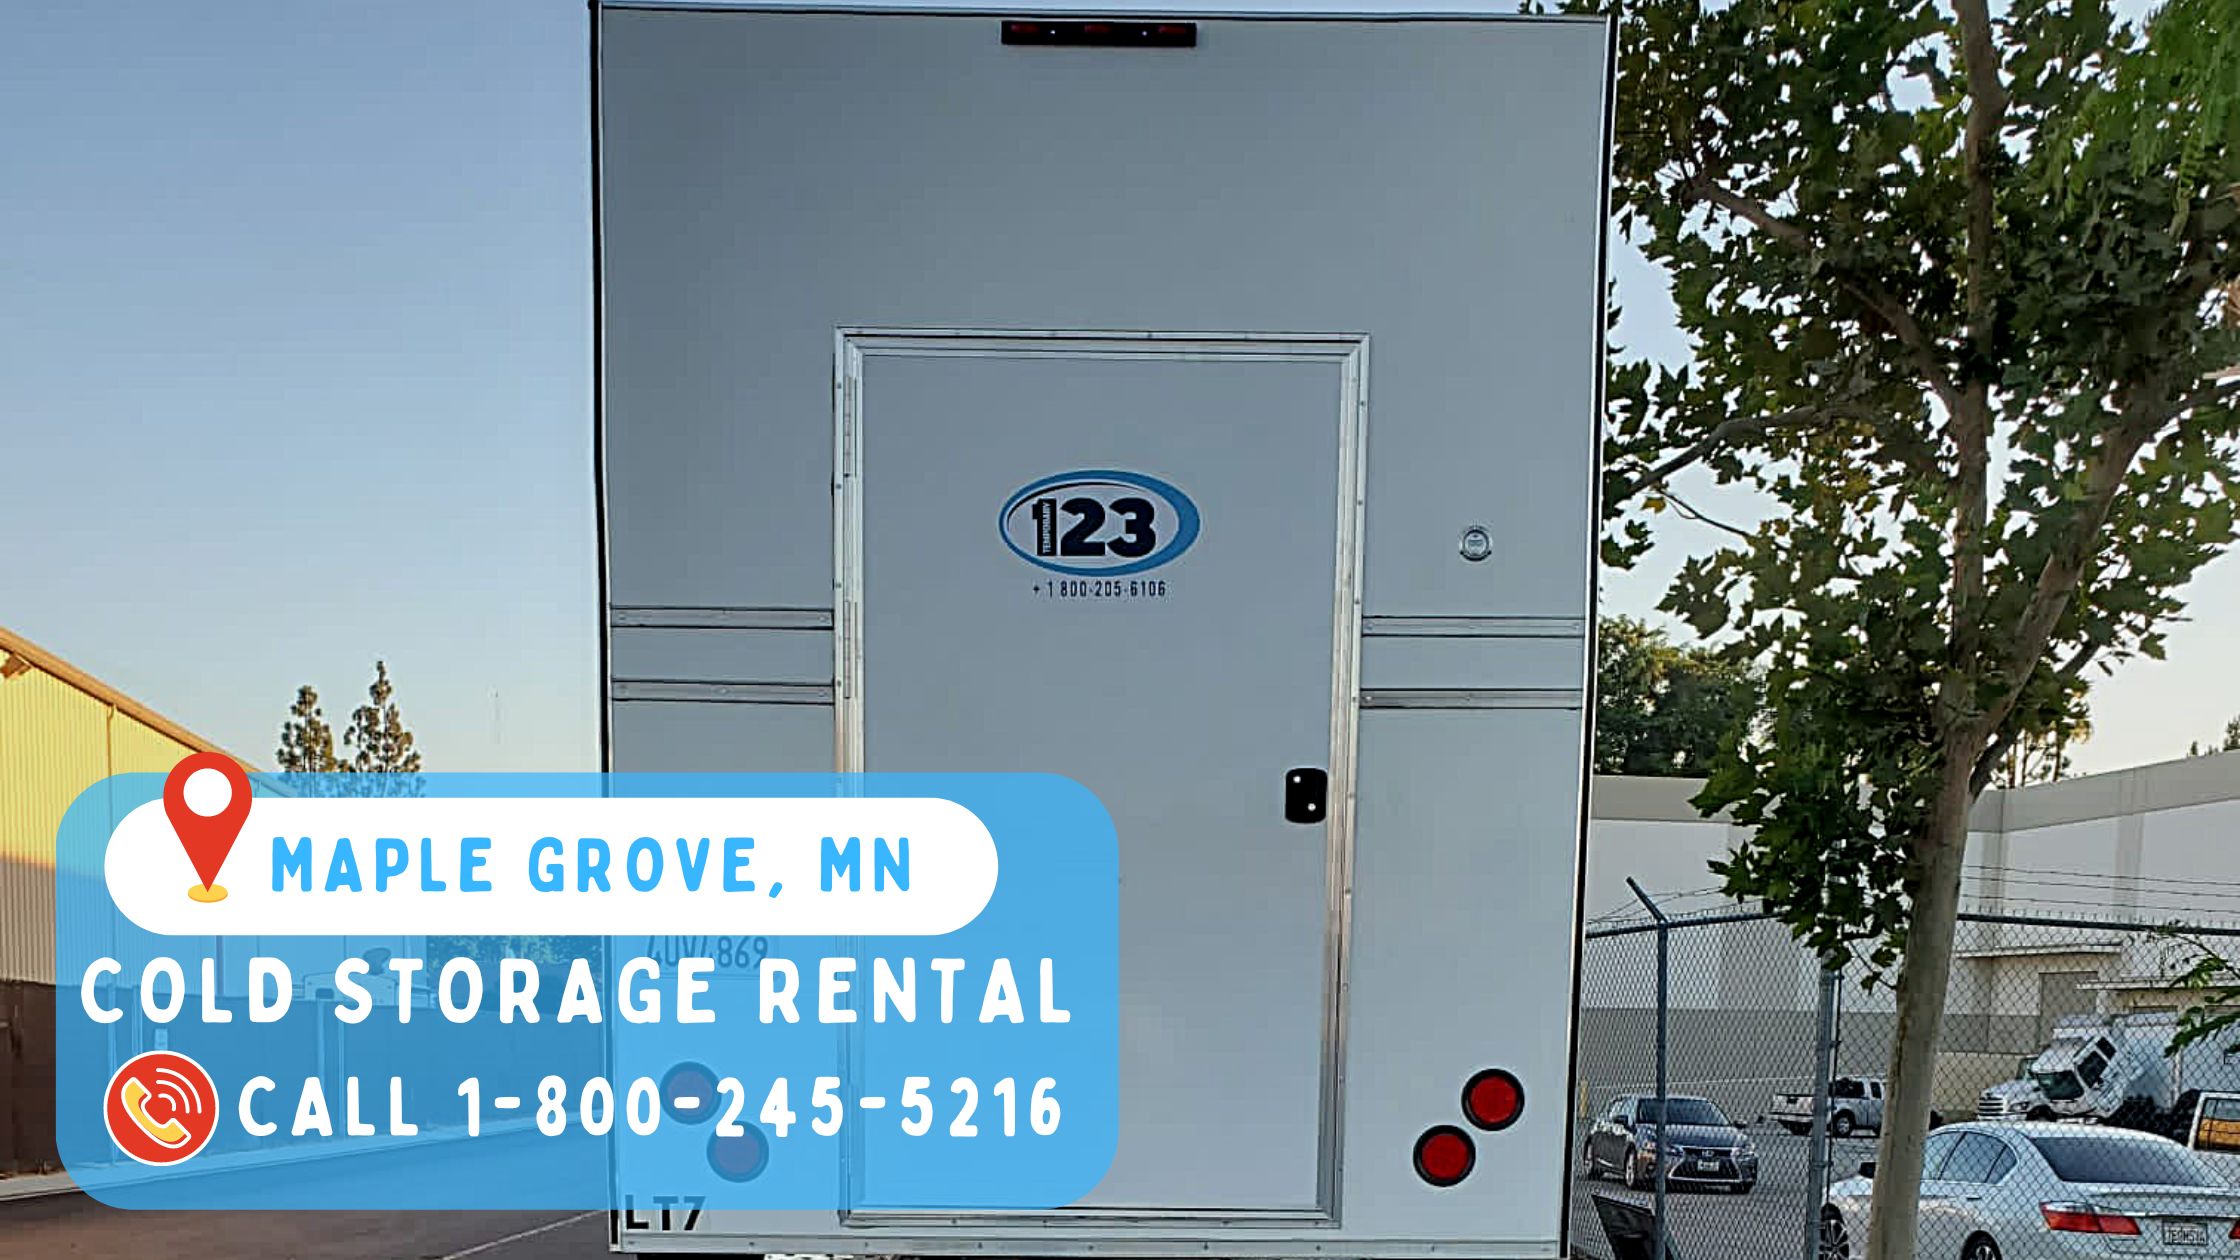 Cold storage rental in Maple Grove